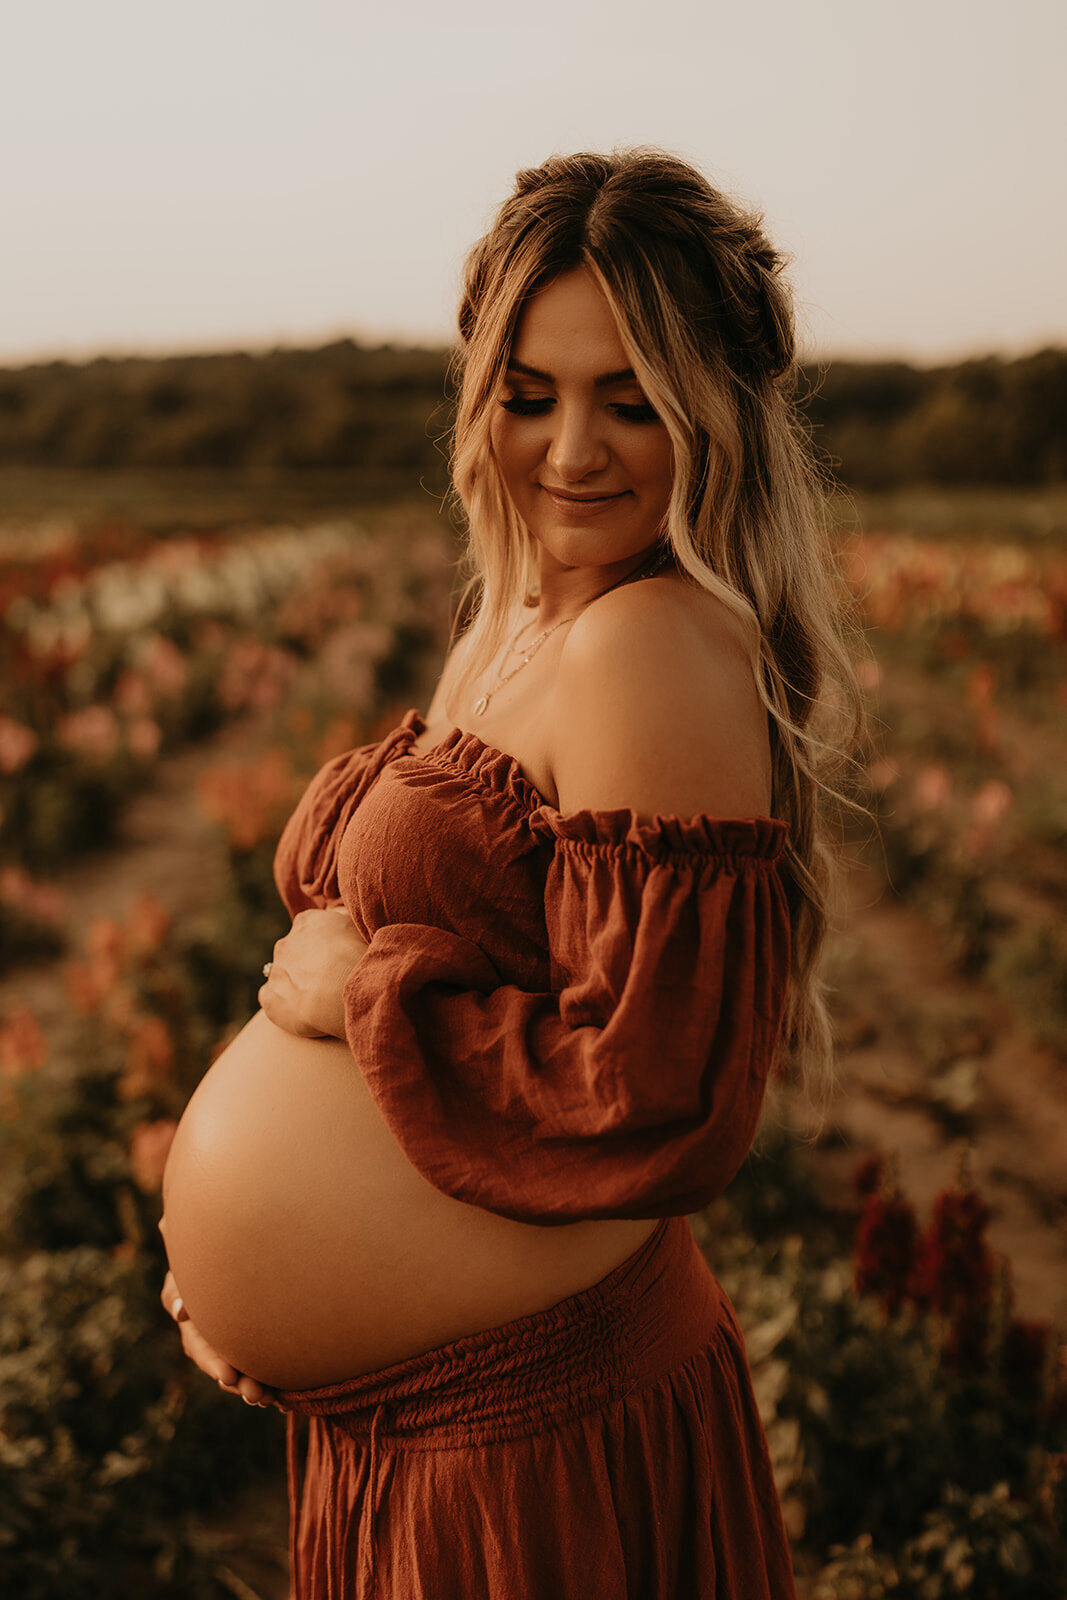 Sunset maternity photography in a flower field